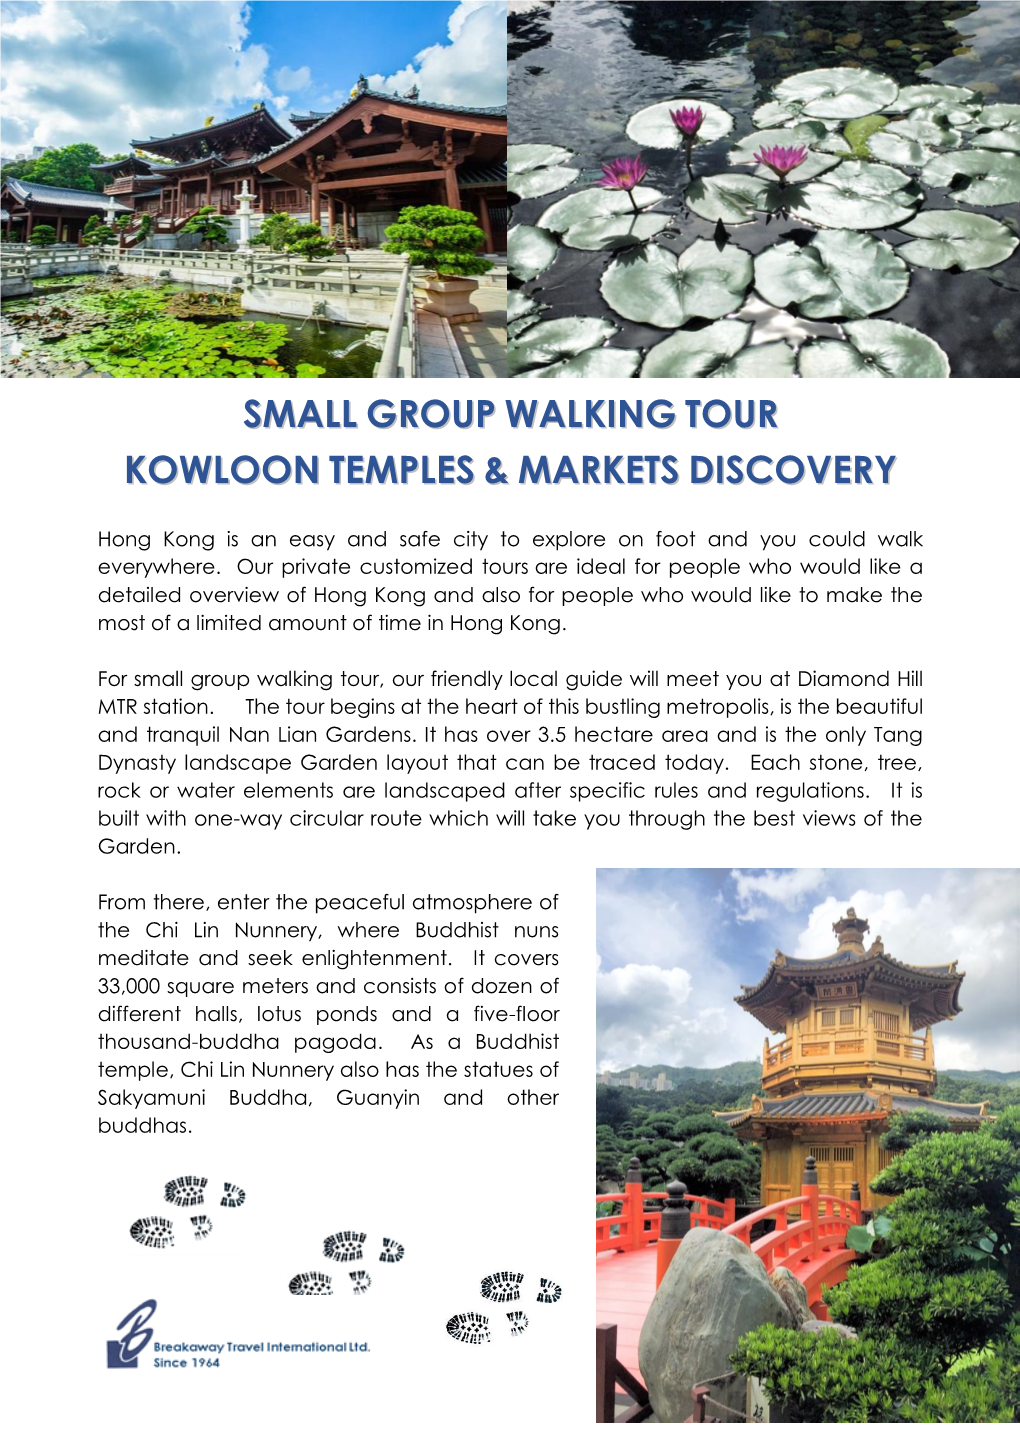 Small Group Walking Tour Kowloon Temples & Markets